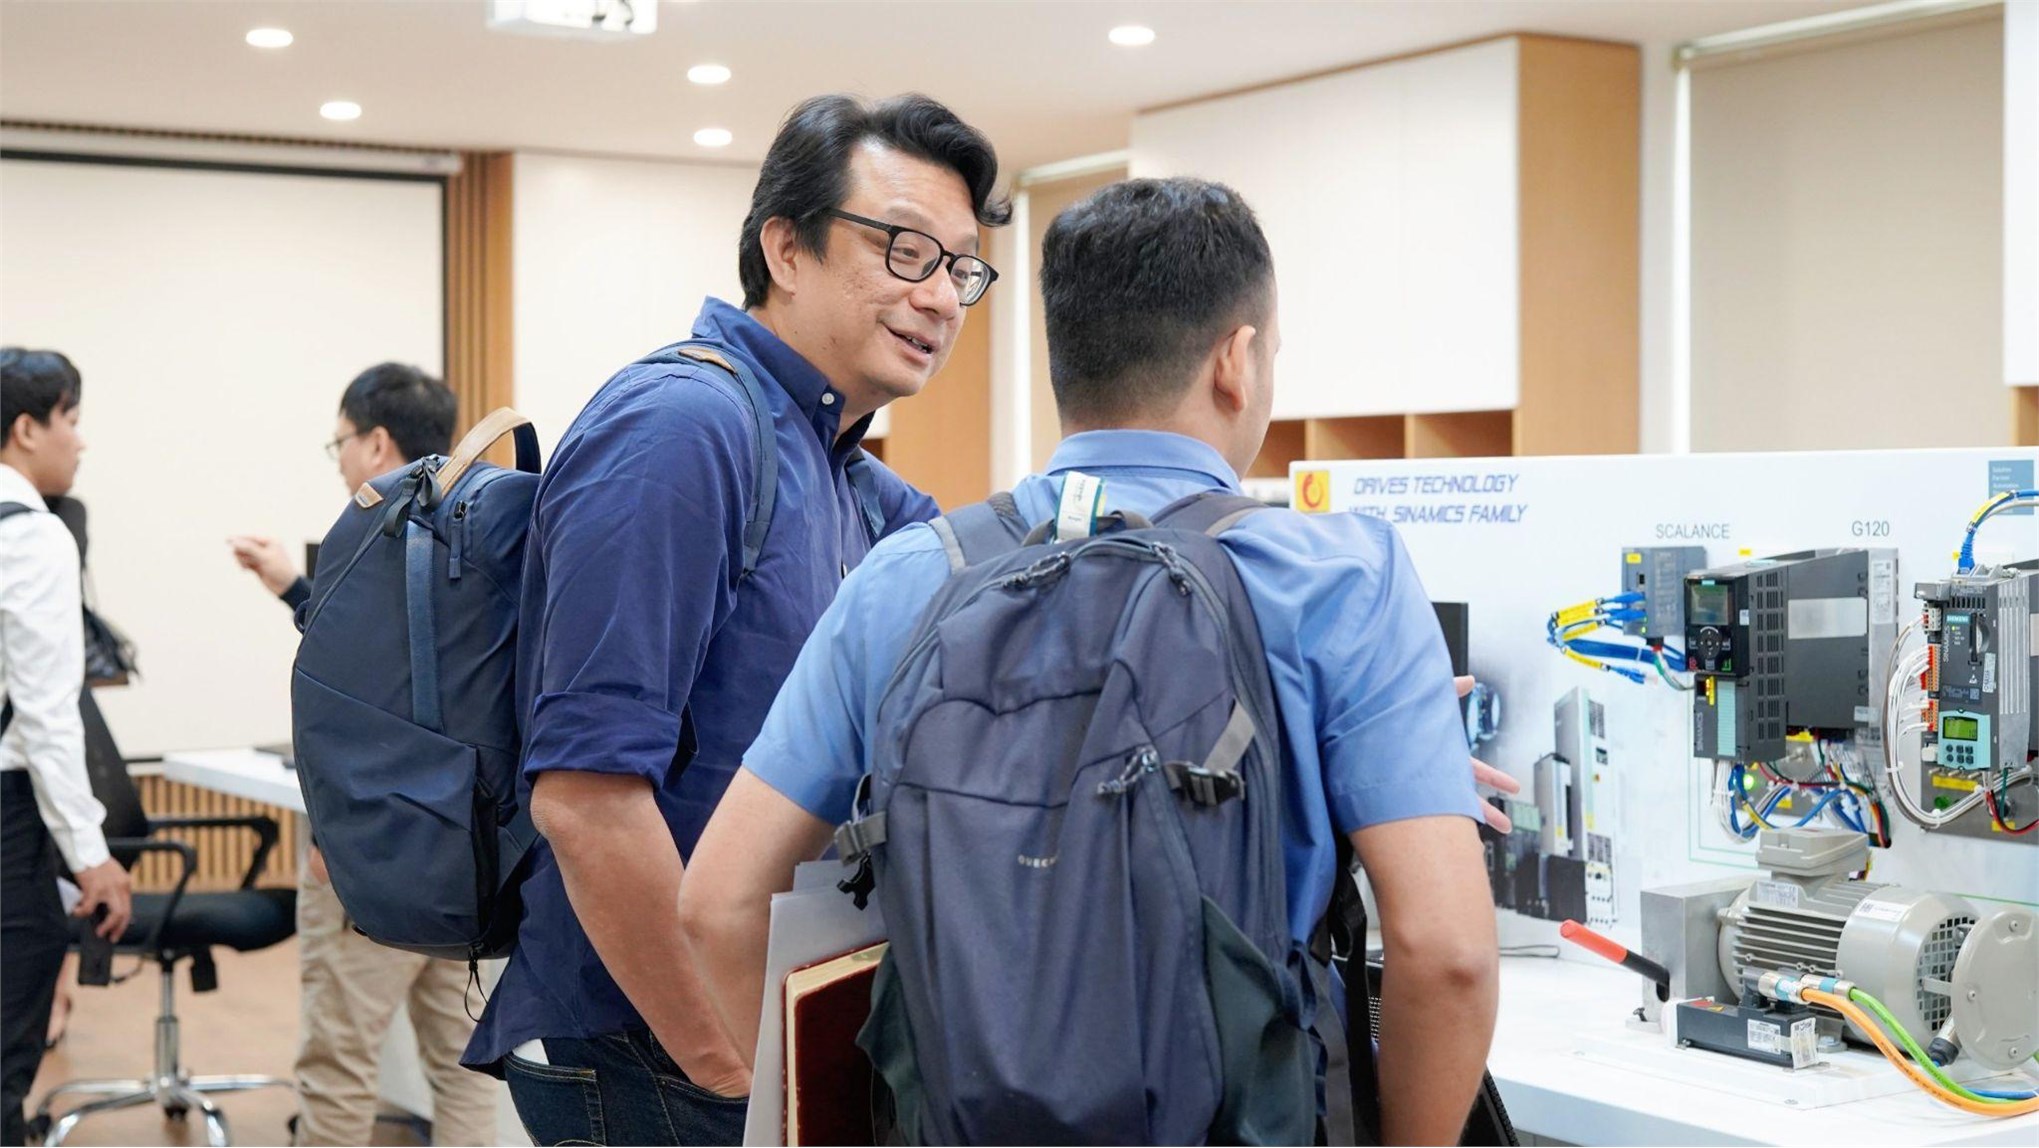 Siemens DISW, Steaming Cambodia, and Vietbay company, paid a working visit to Hanoi University of Industry to exchange experiences on building and operating the Smart Factory Research Center.